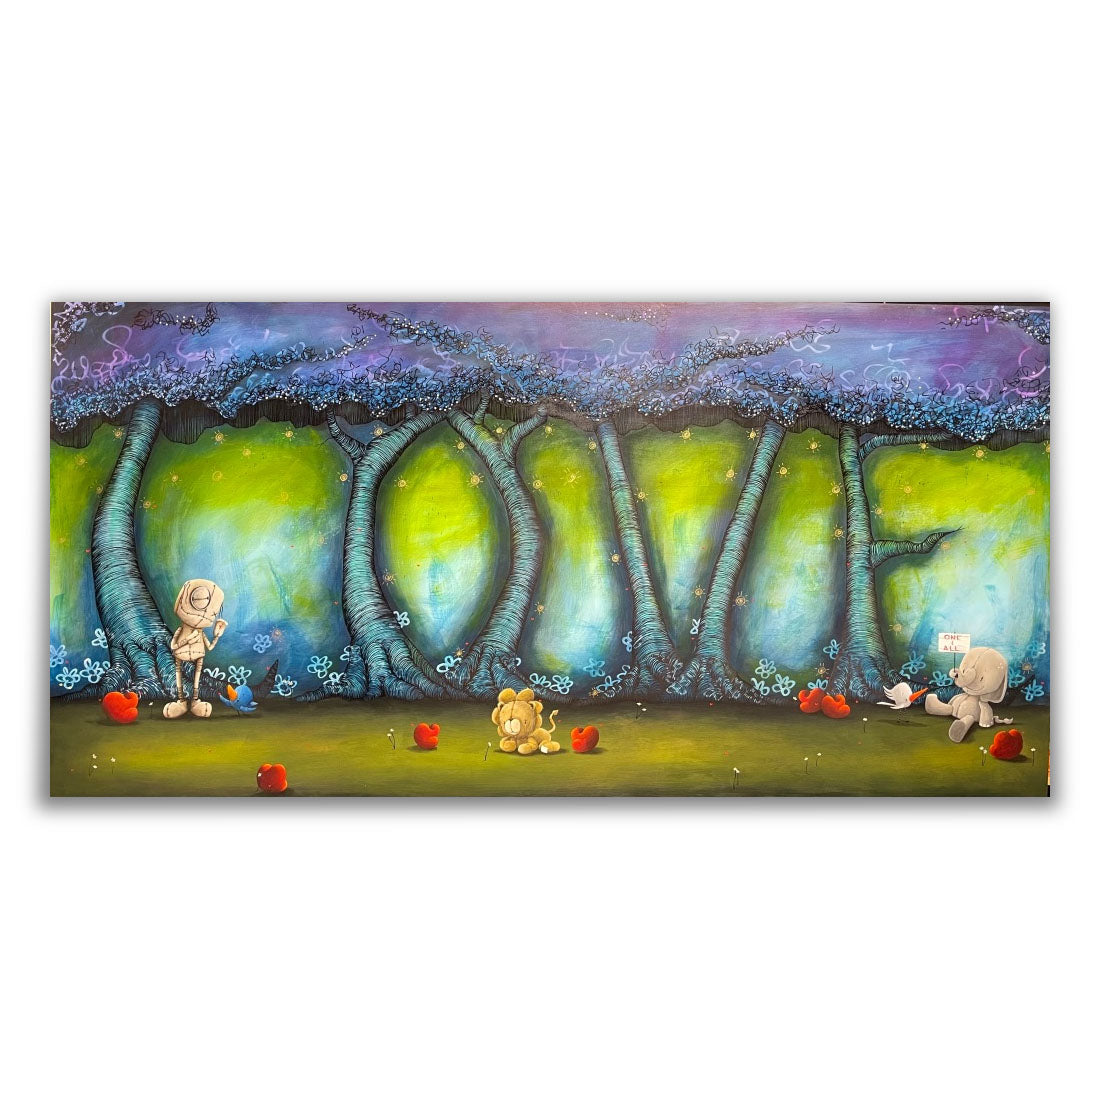 Fabio Napoleoni "Love One and All" Limited Edition Canvas Giclee